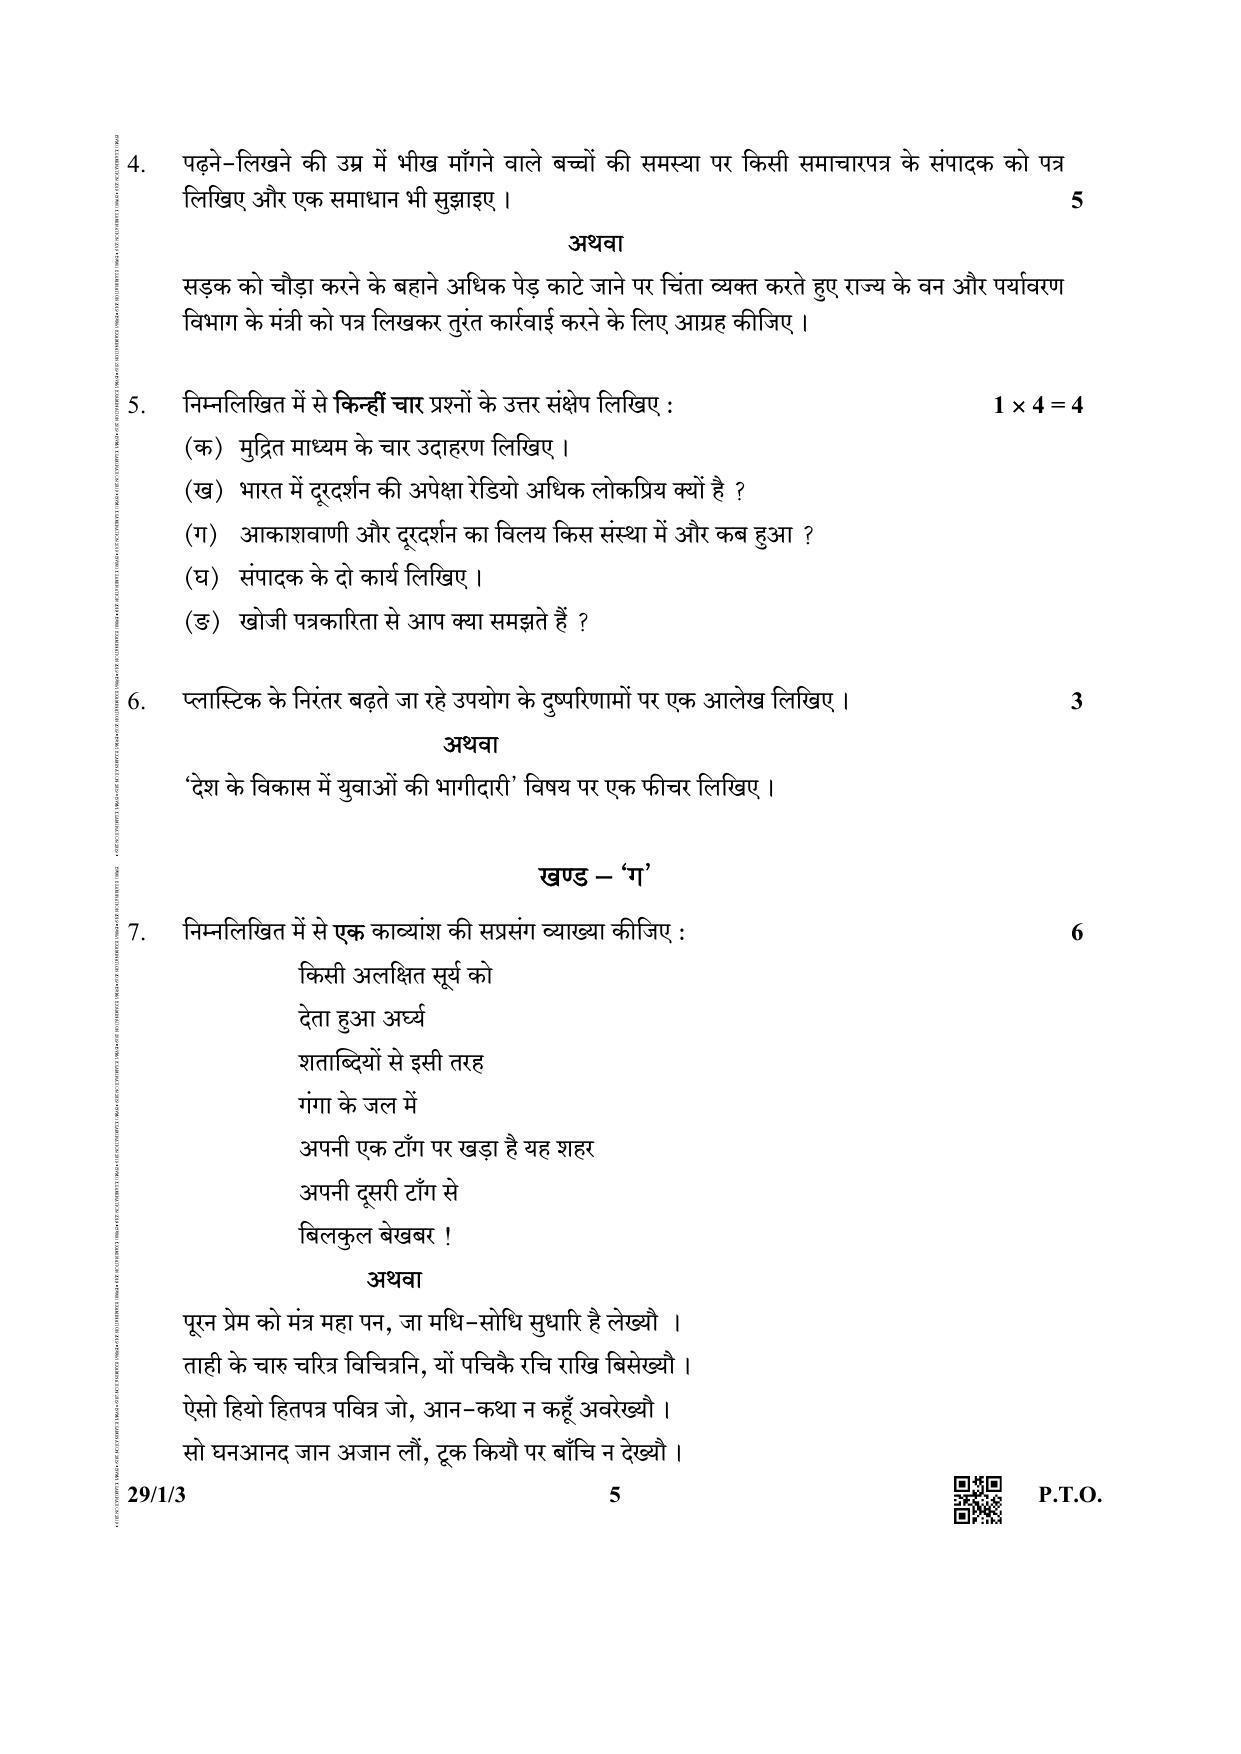 CBSE Class 12 29-1-3 (Hindi ELECTIVE) 2019 Question Paper - Page 5